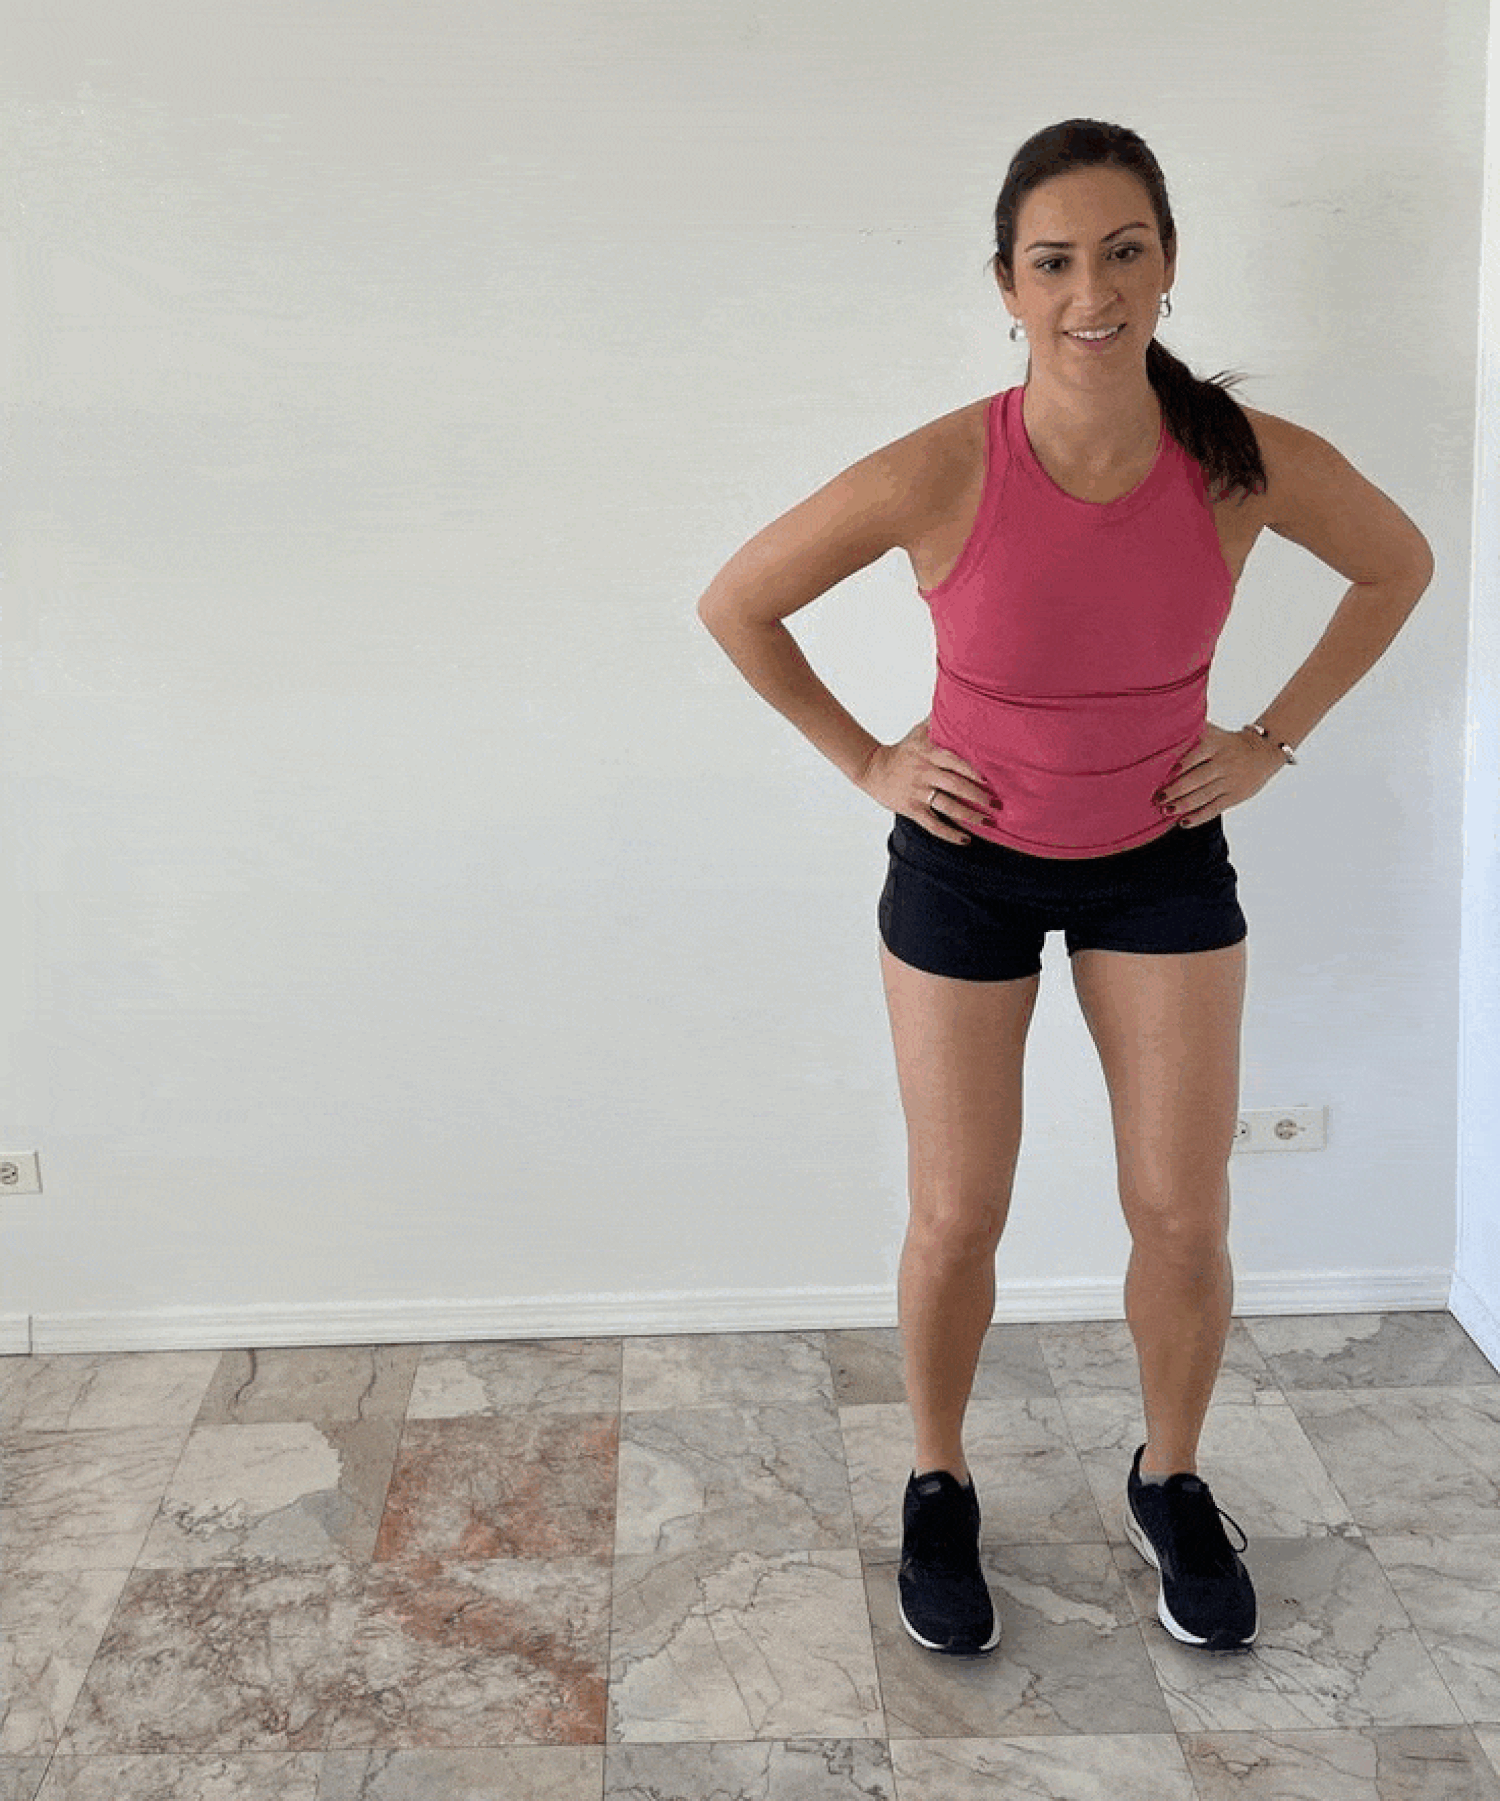 The best exercises to tone your legs – no weights required